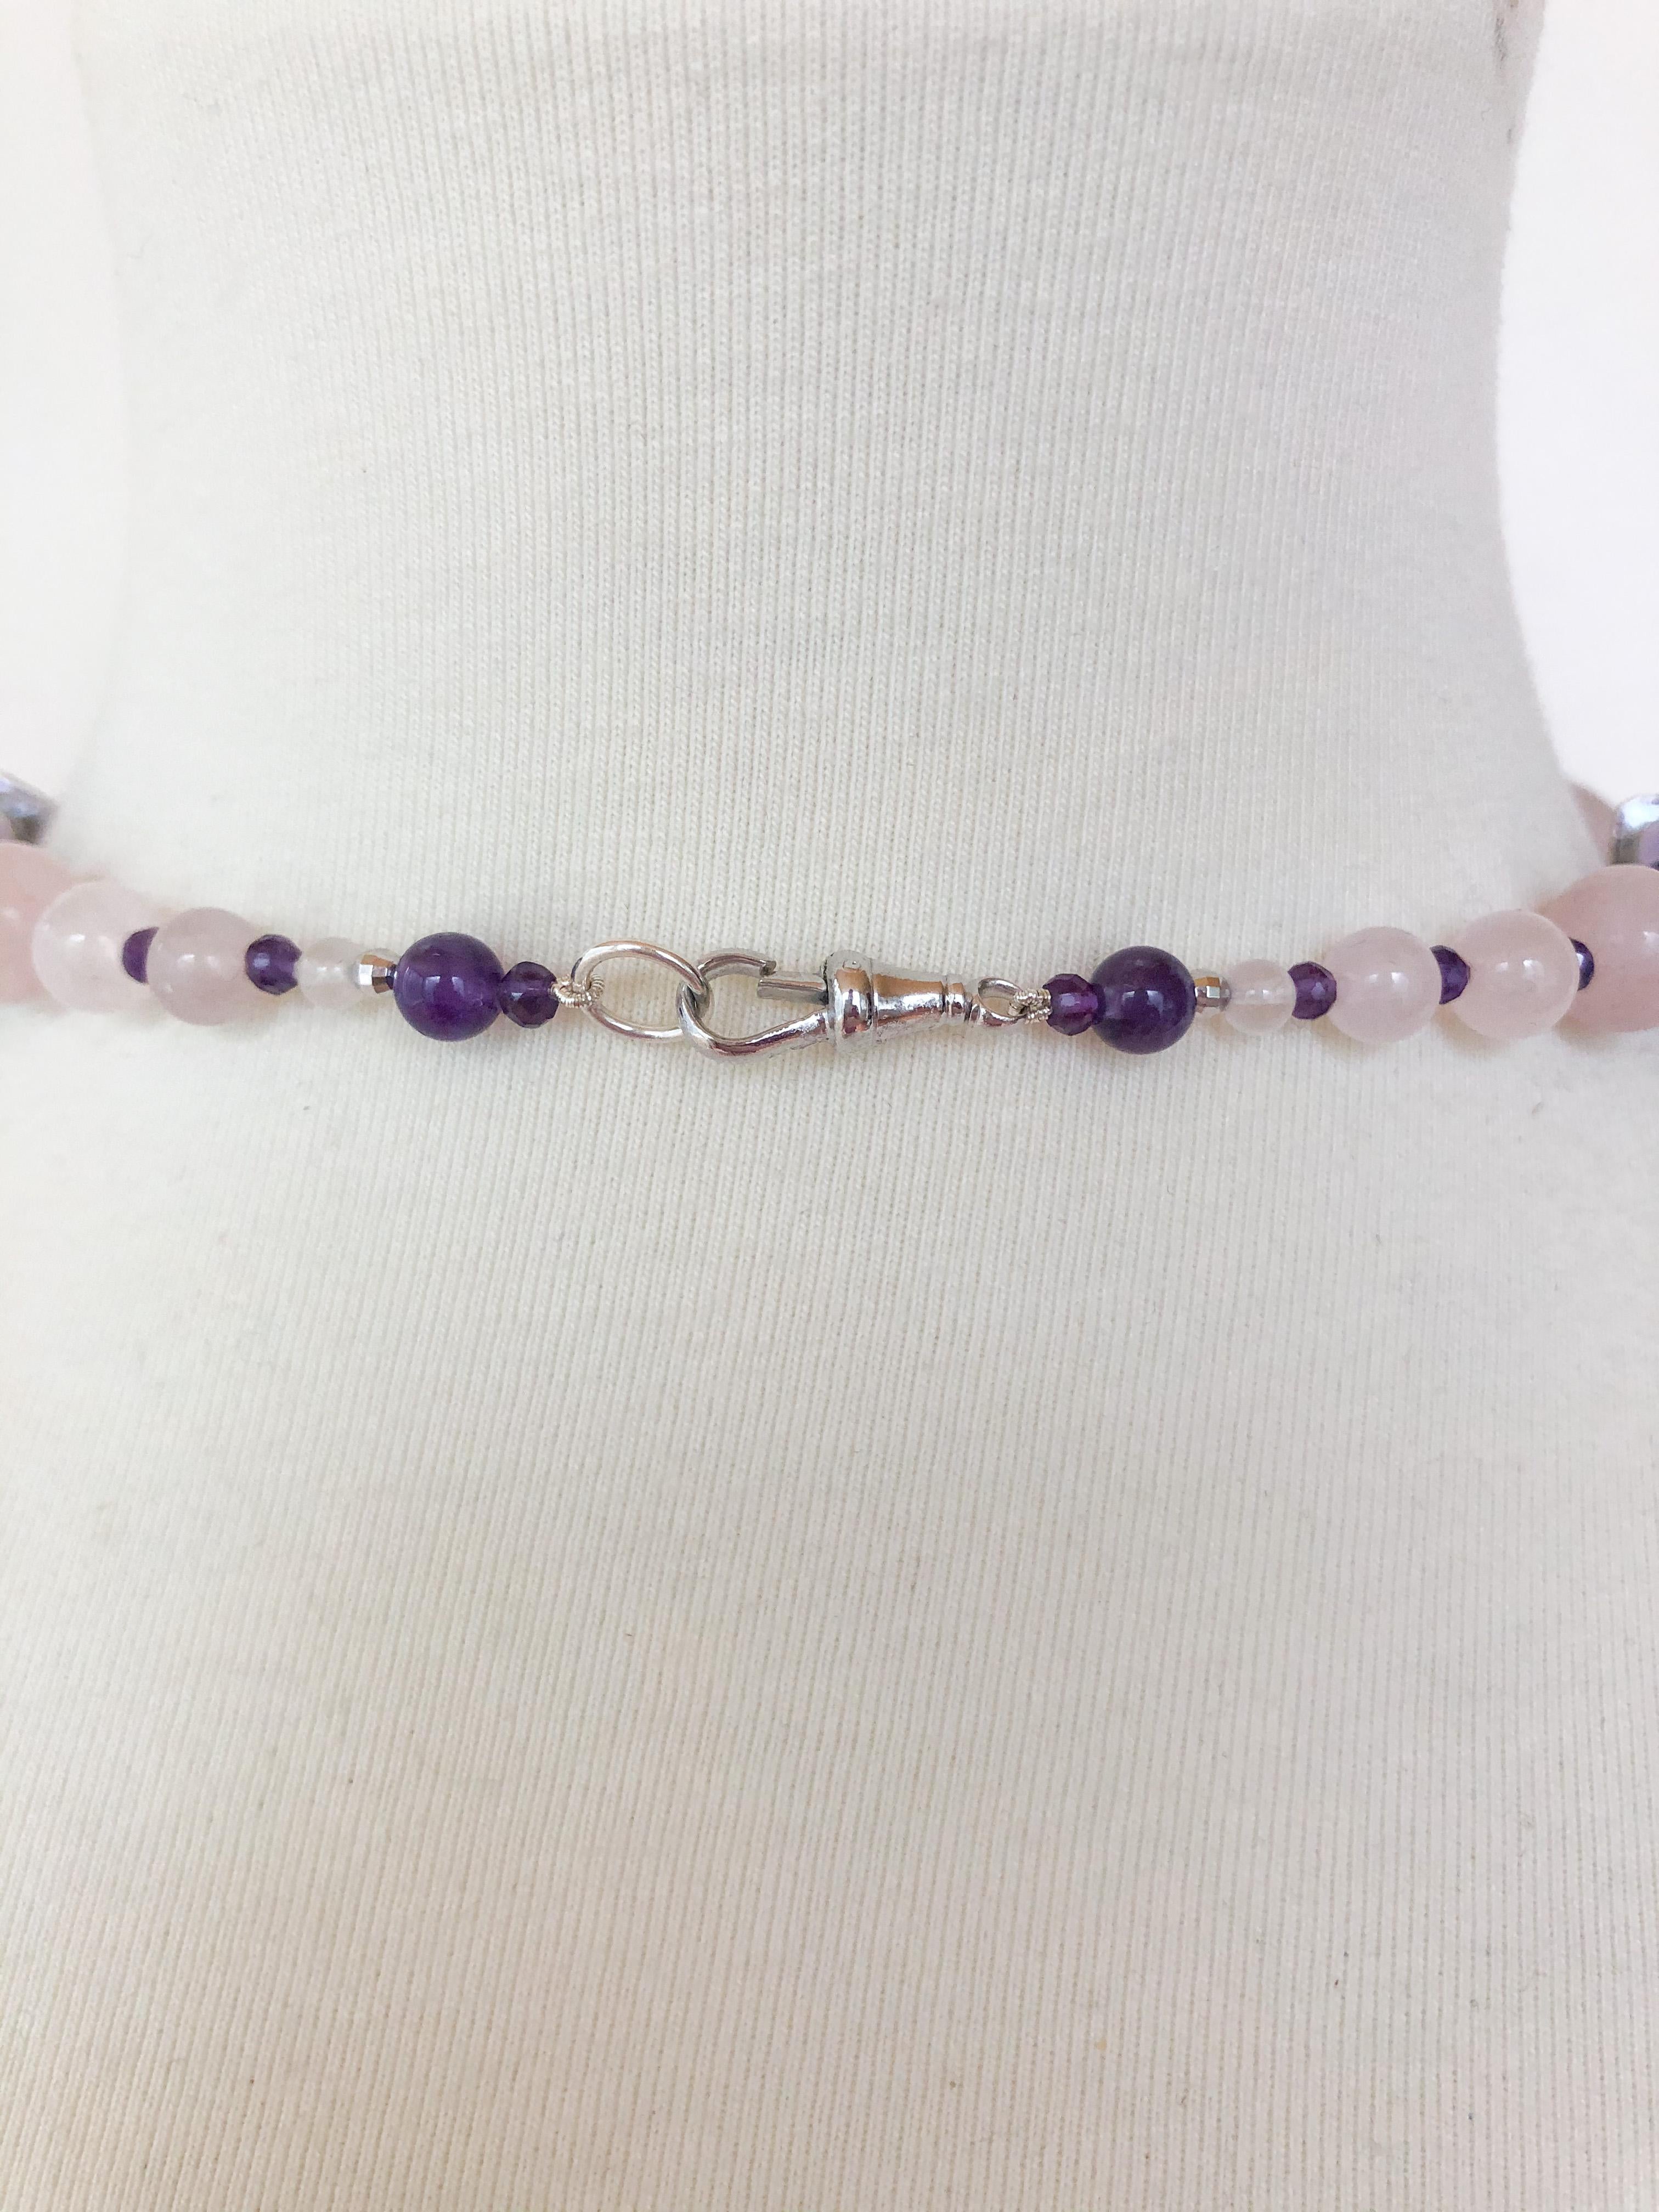 Brilliant Cut Marina J. Amethyst, Rose Quartz and Grey Pearl Necklace with Silver Clasp